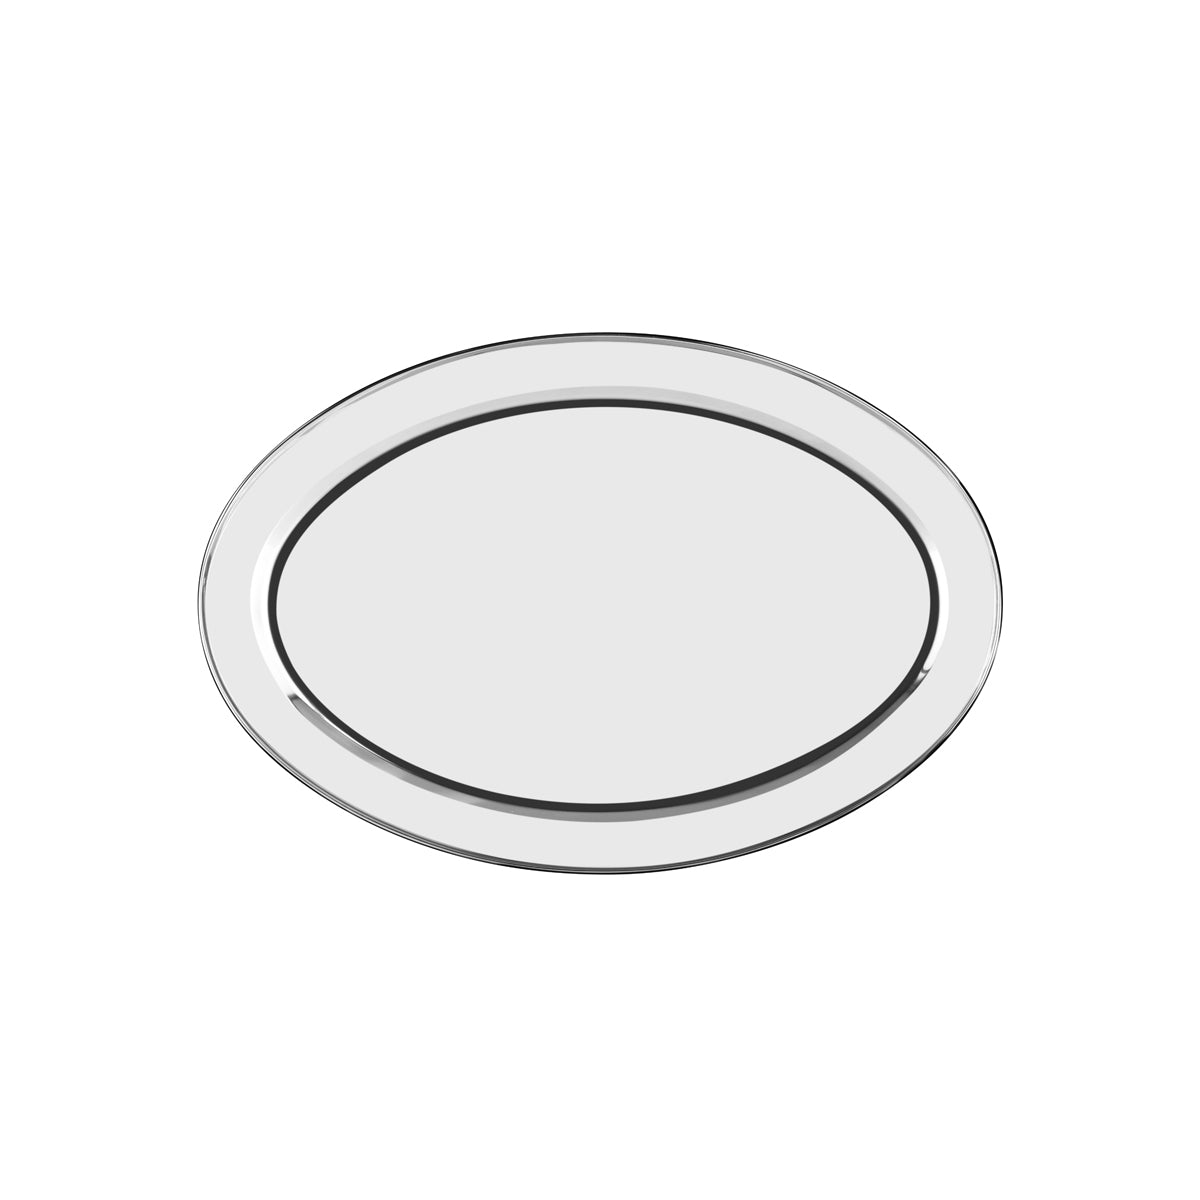 70718 Chef Inox Oval Platter Rolled Edge Stainless Steel 450x355mm Tomkin Australia Hospitality Supplies